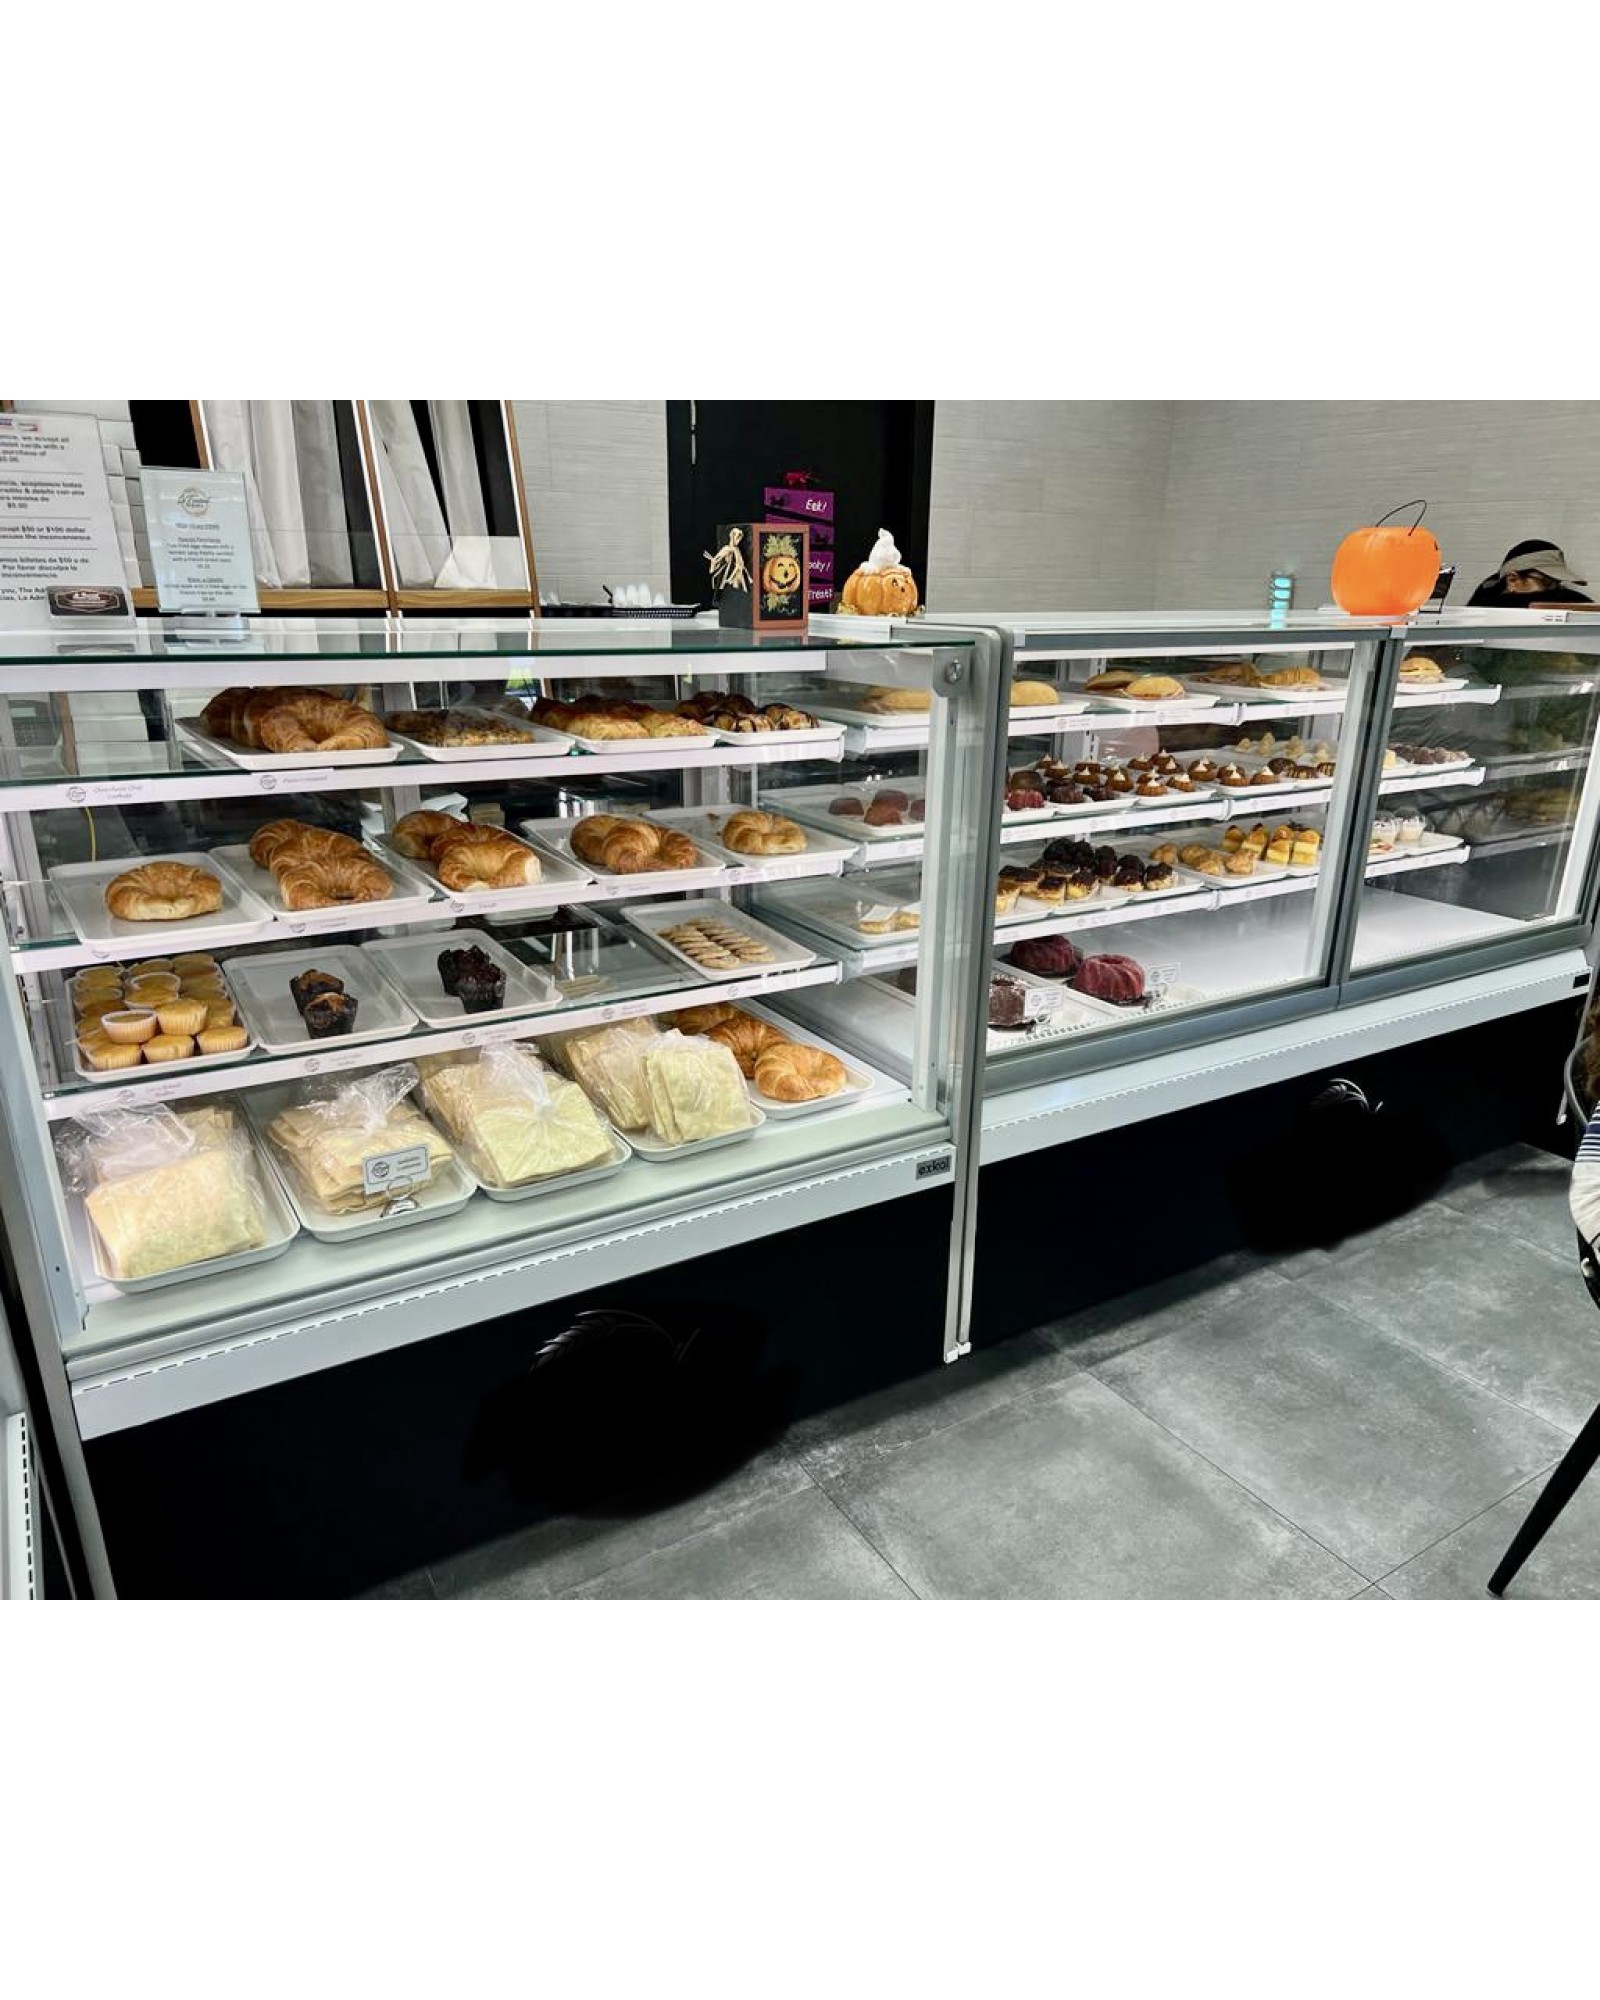 Bakery Case (Refrigerated 39")